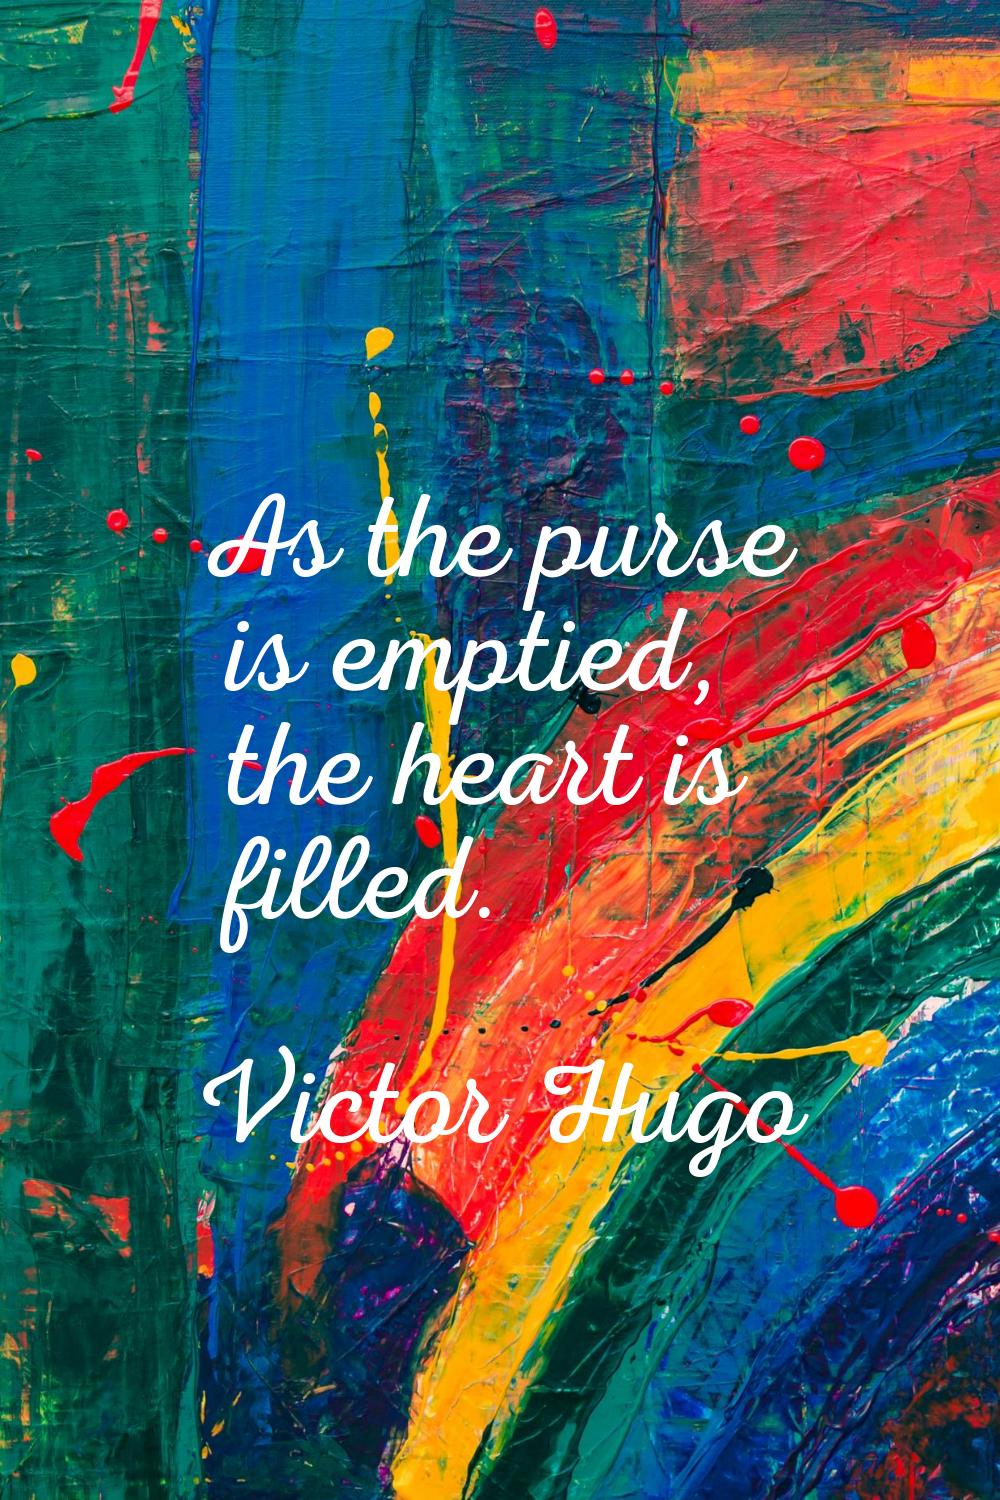 As the purse is emptied, the heart is filled.